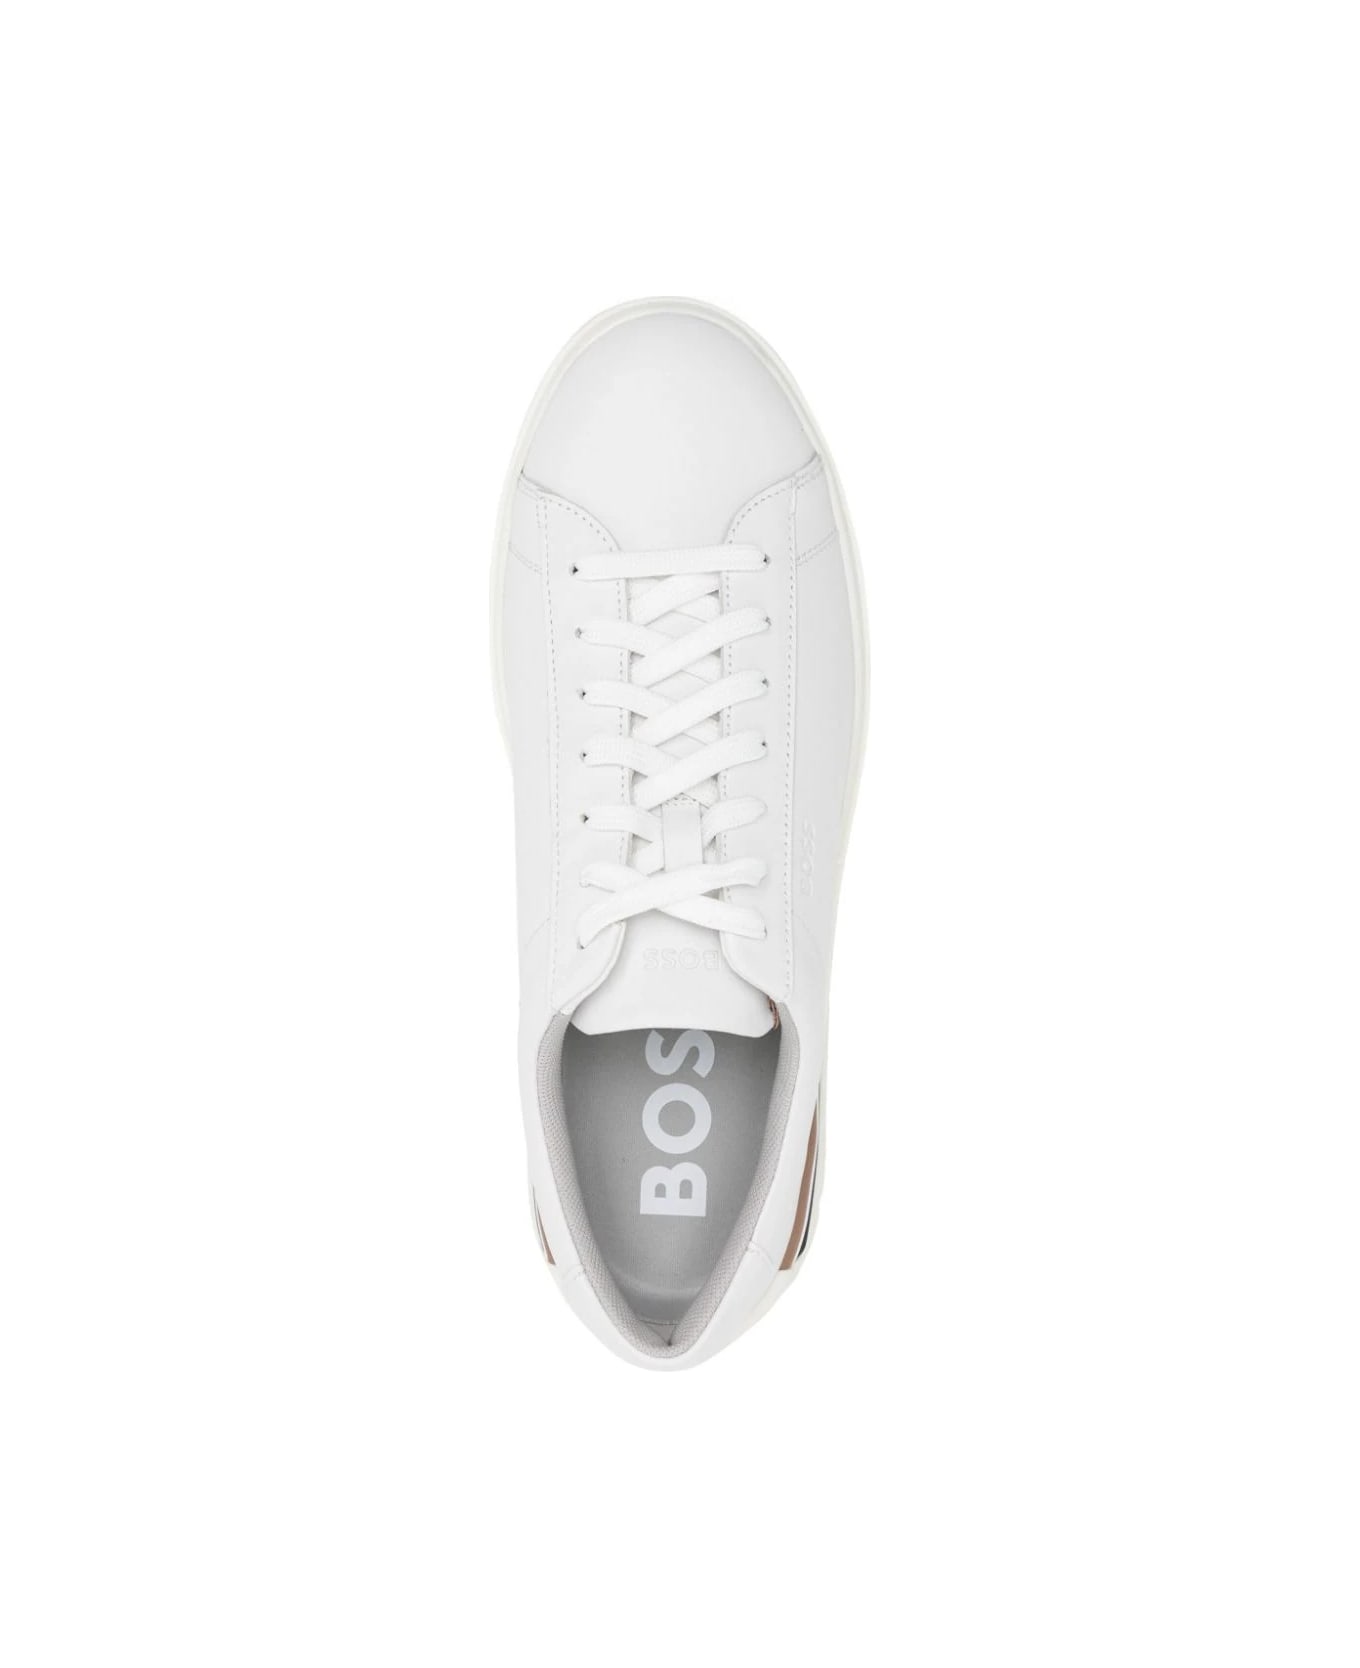 Hugo Boss White Leather Sneakers With Preformed Sole, Logo And Typical Brand Stripes - White